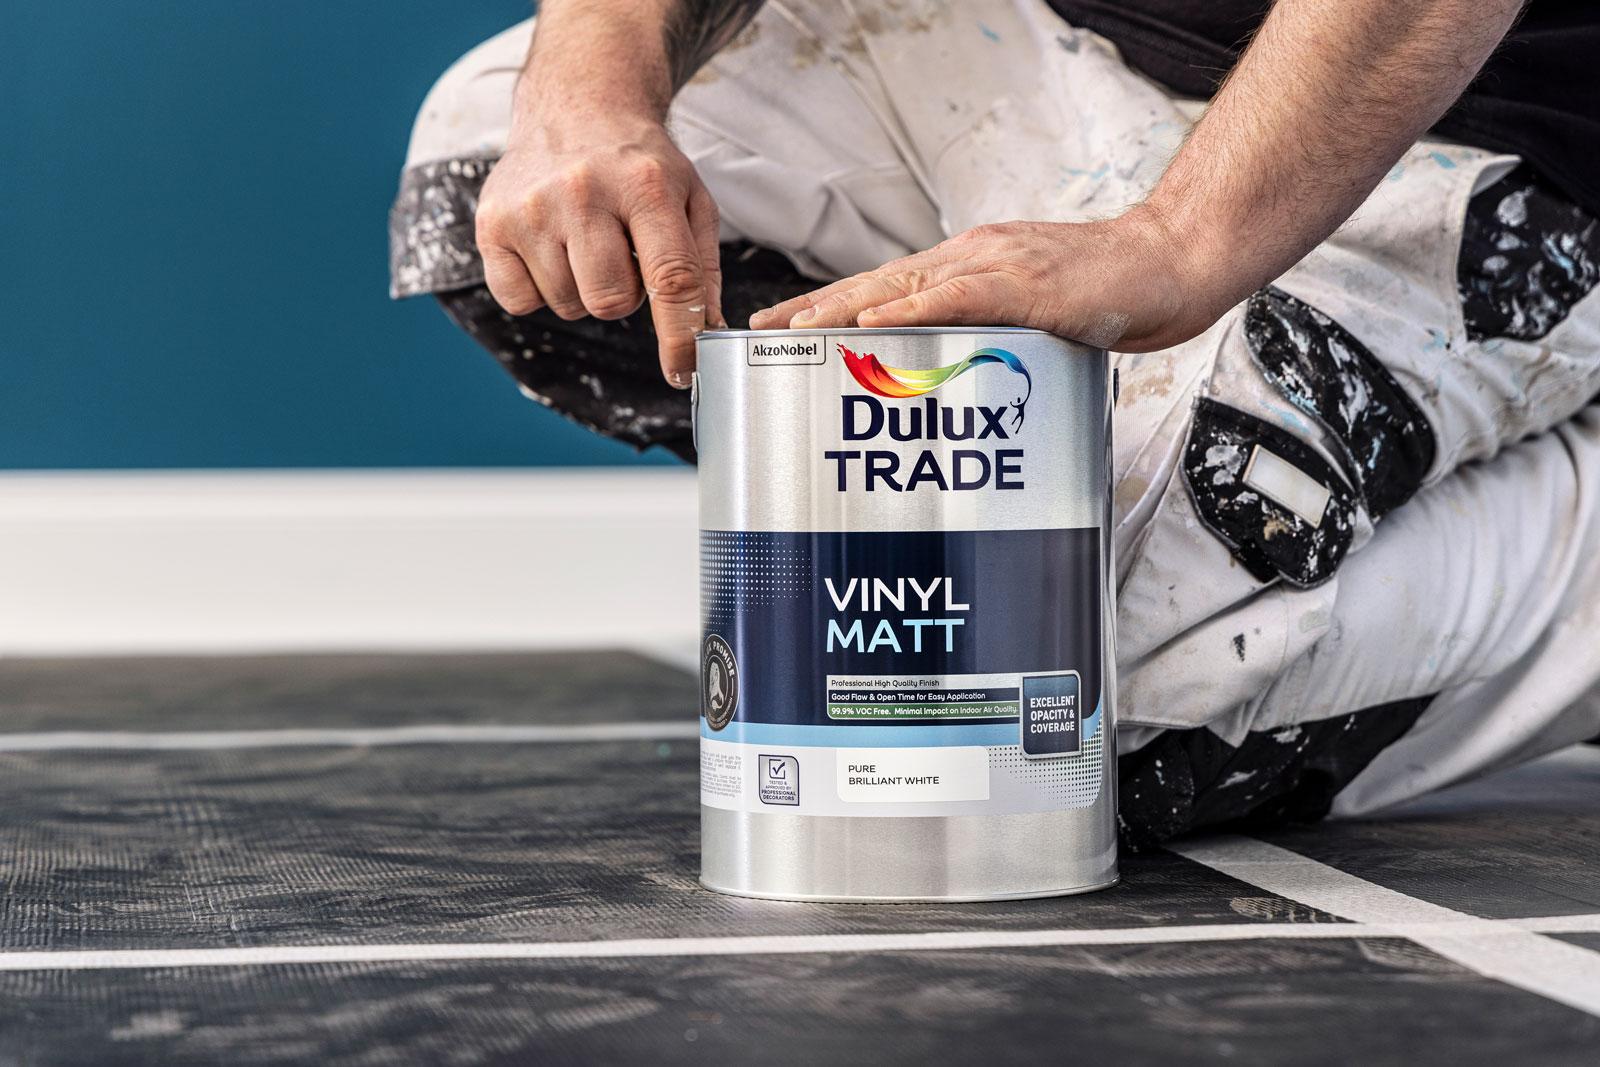 Painter opening a can of Dulux paint